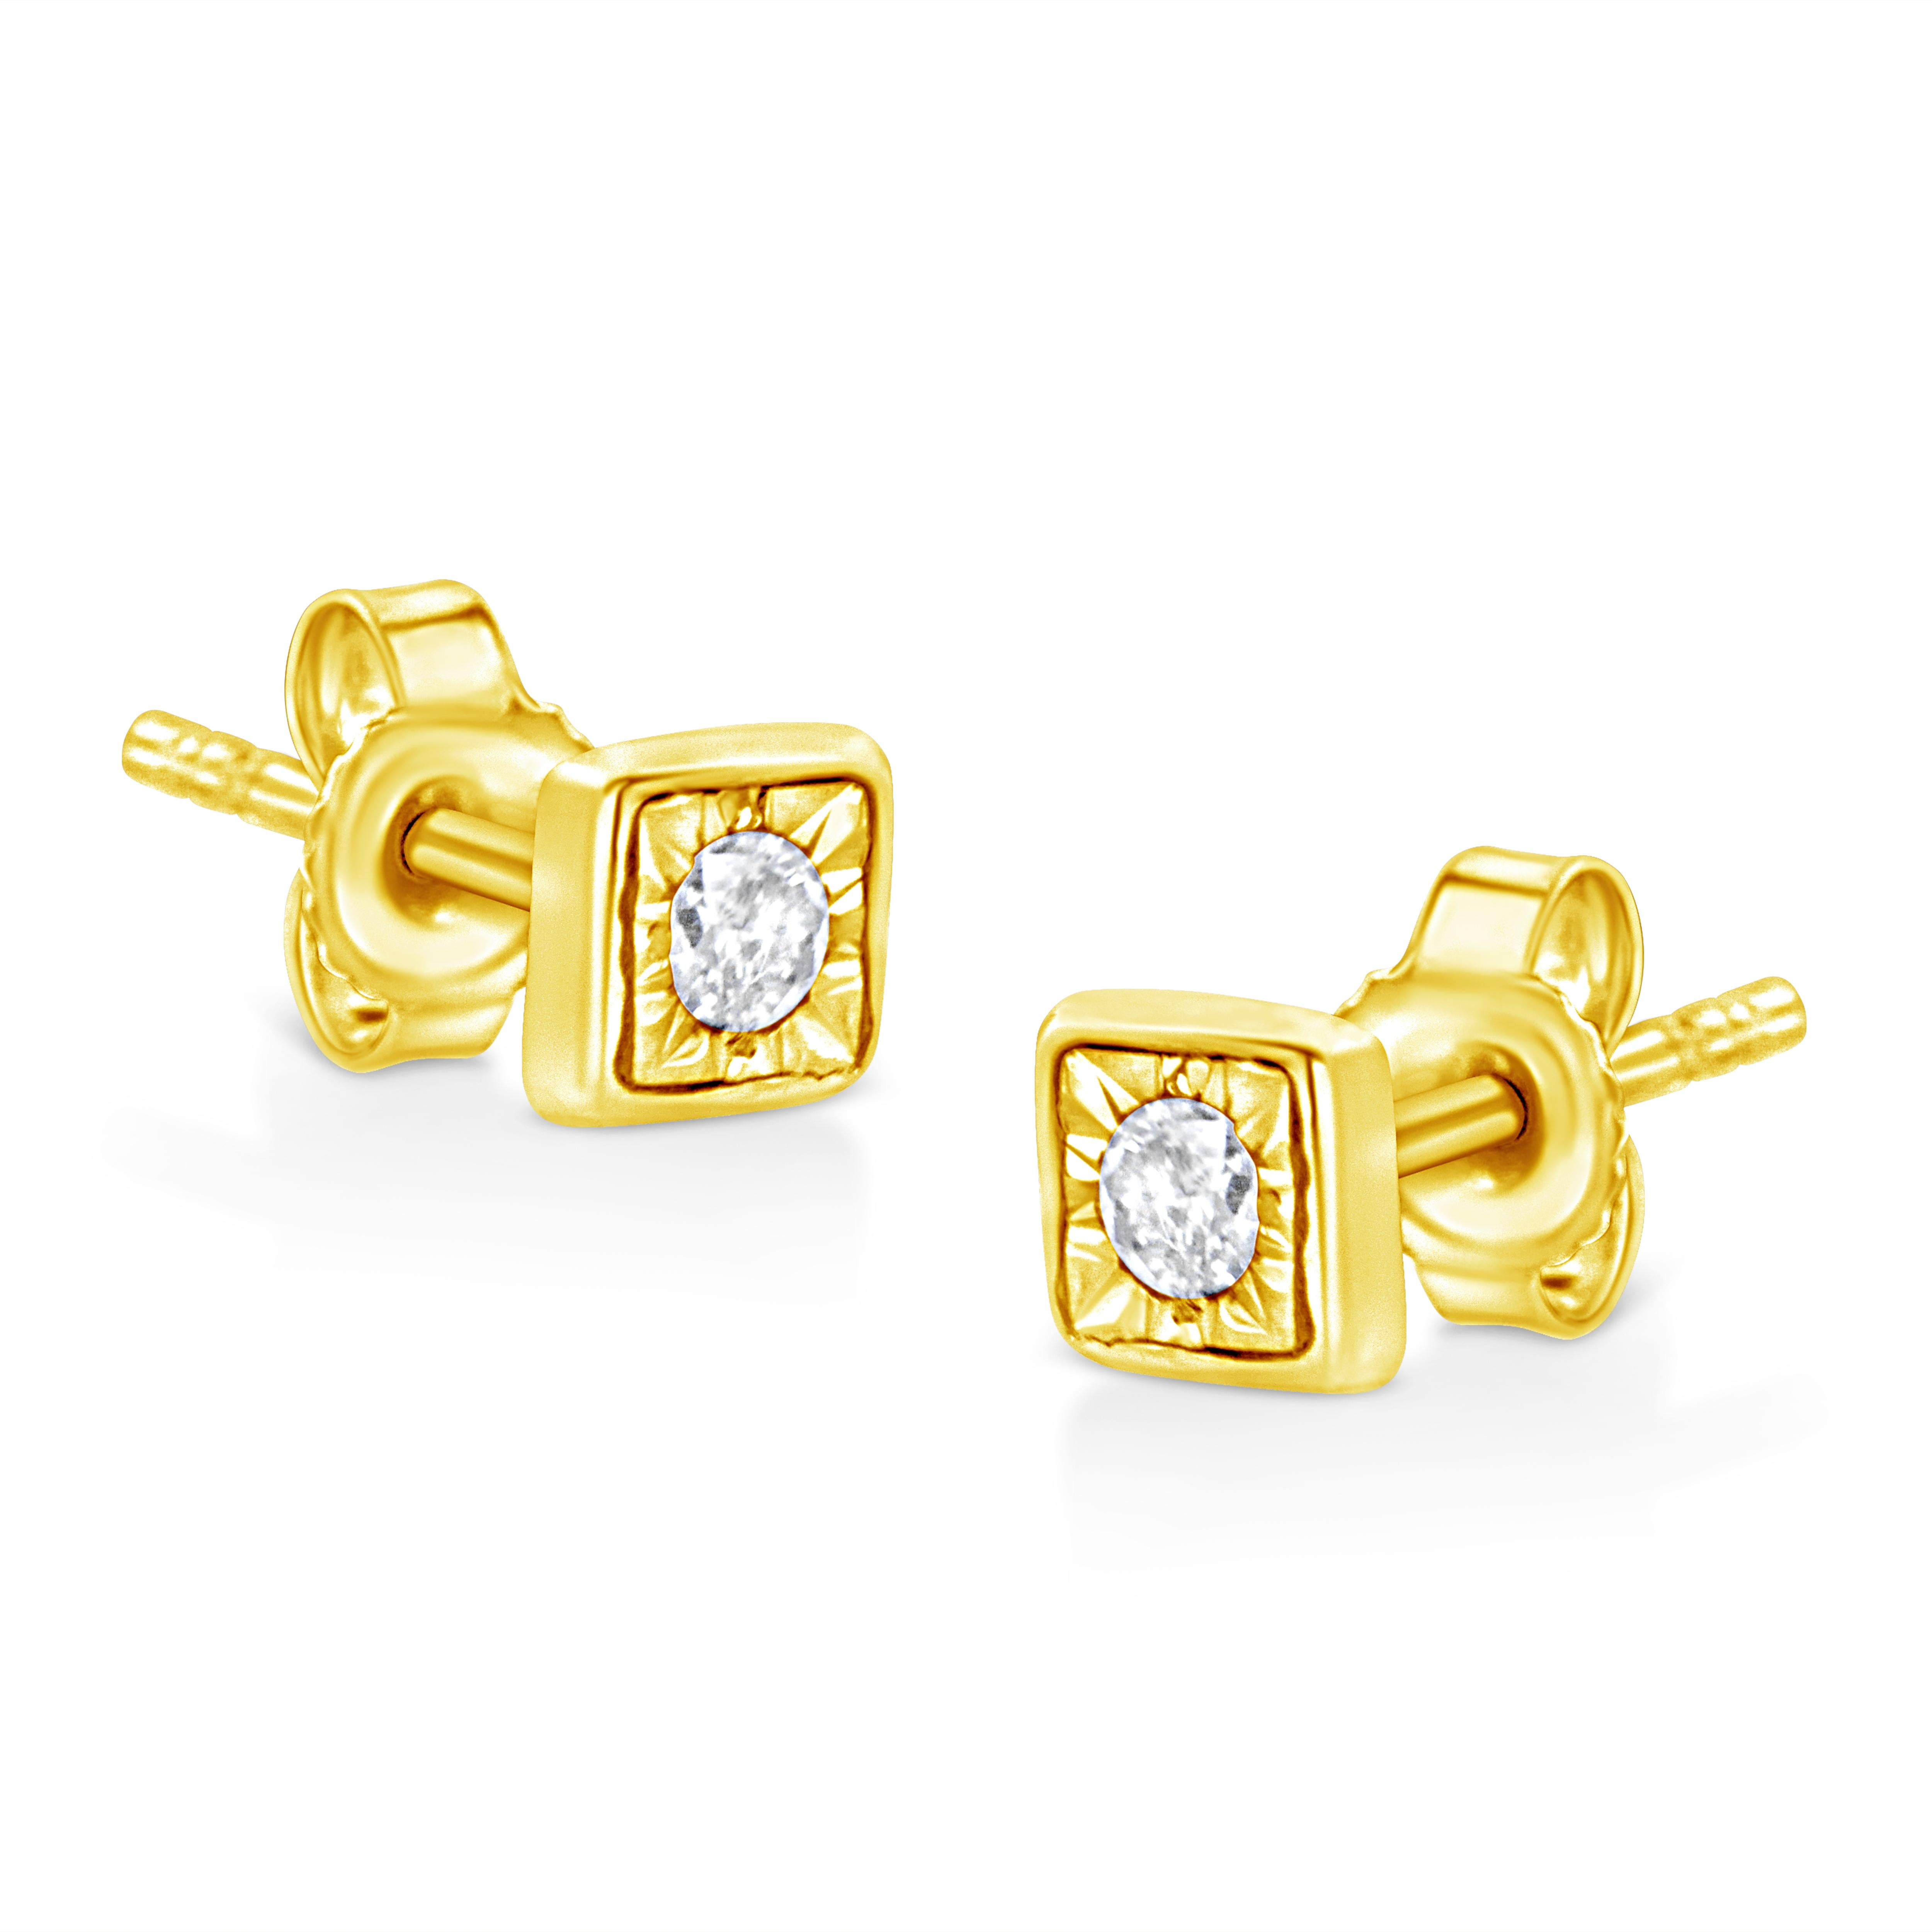 Contemporary Yellow Gold Plated Sterling Silver 1/10 Carat Diamond Square Stud Earrings For Sale